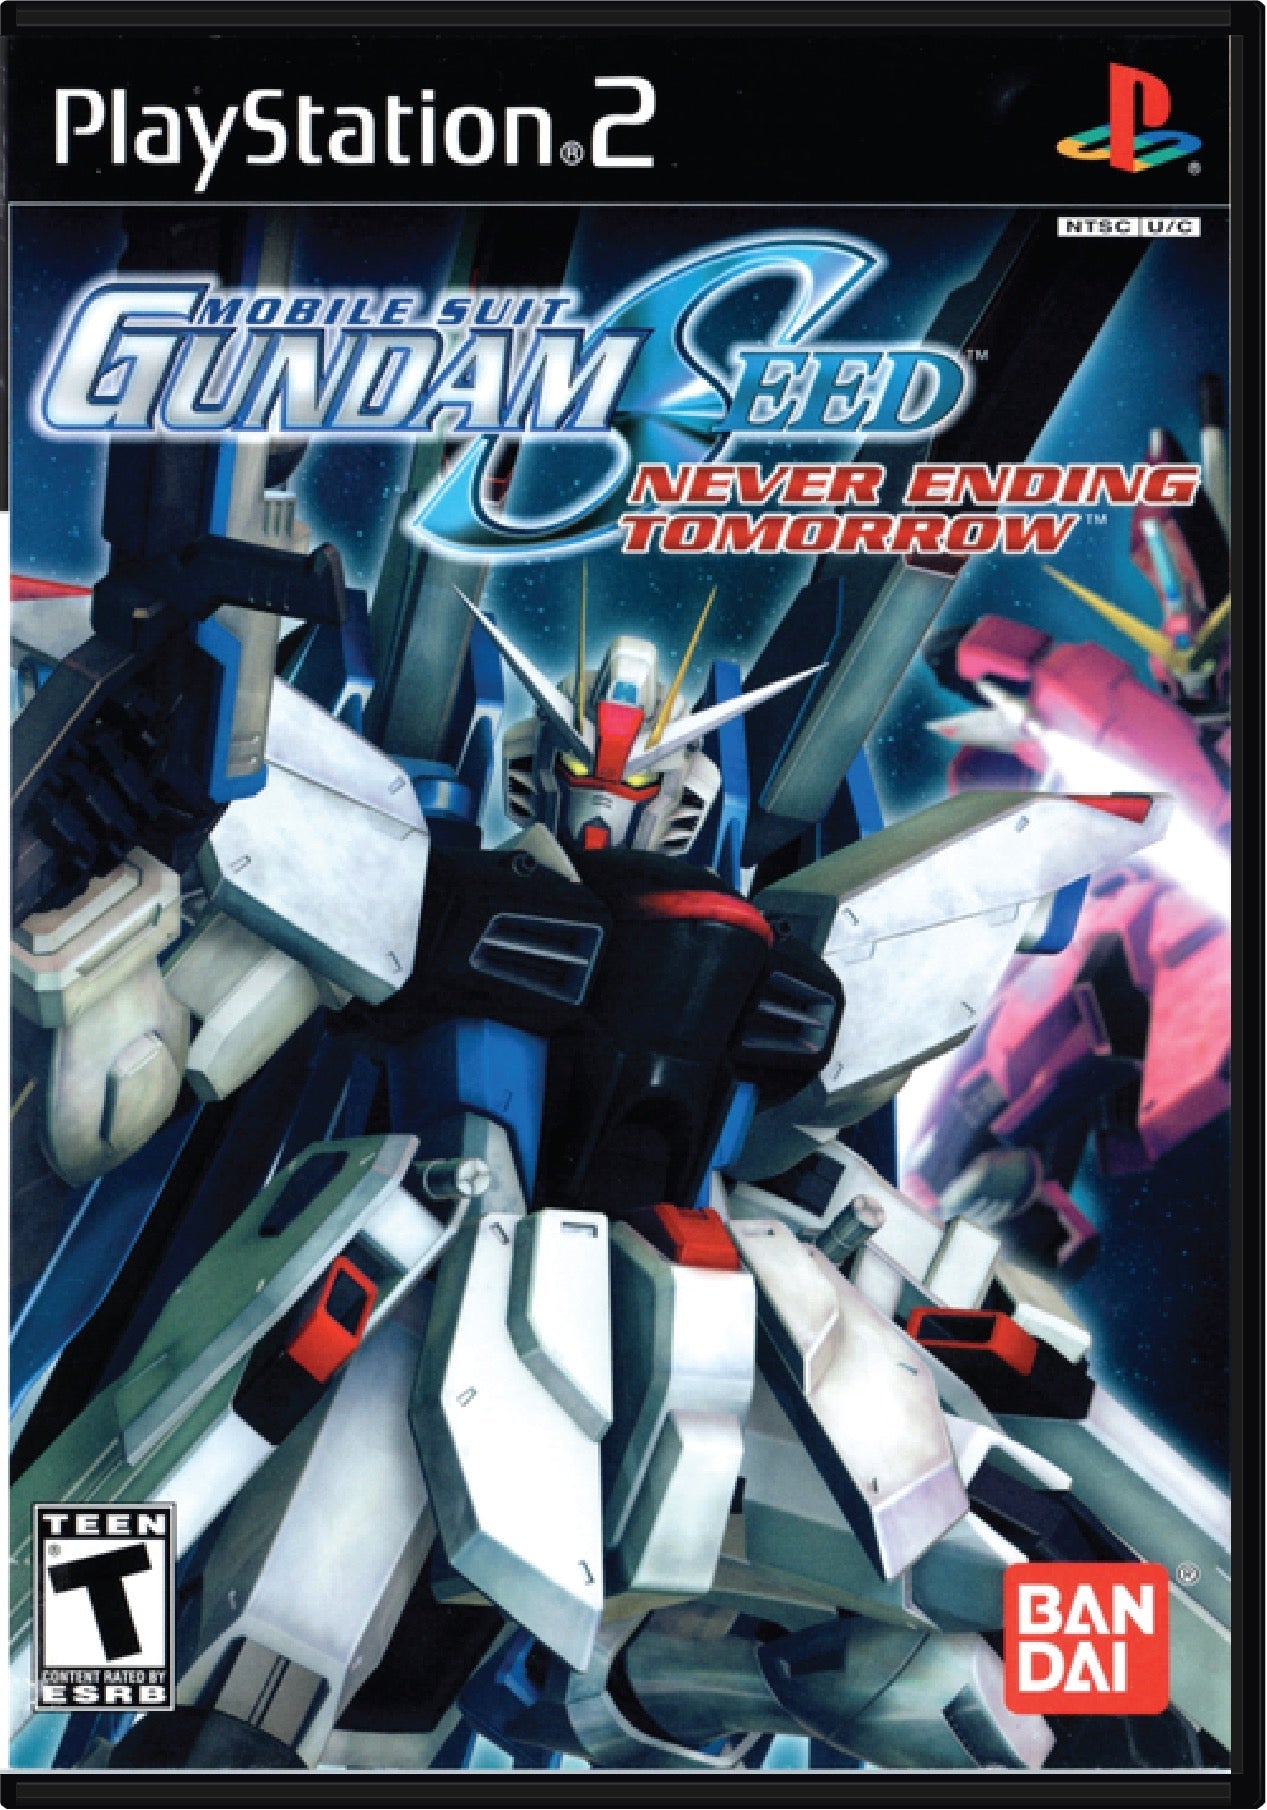 Mobile Suit Gundam Seed Never Ending Tomorrow Cover Art and Product Photo